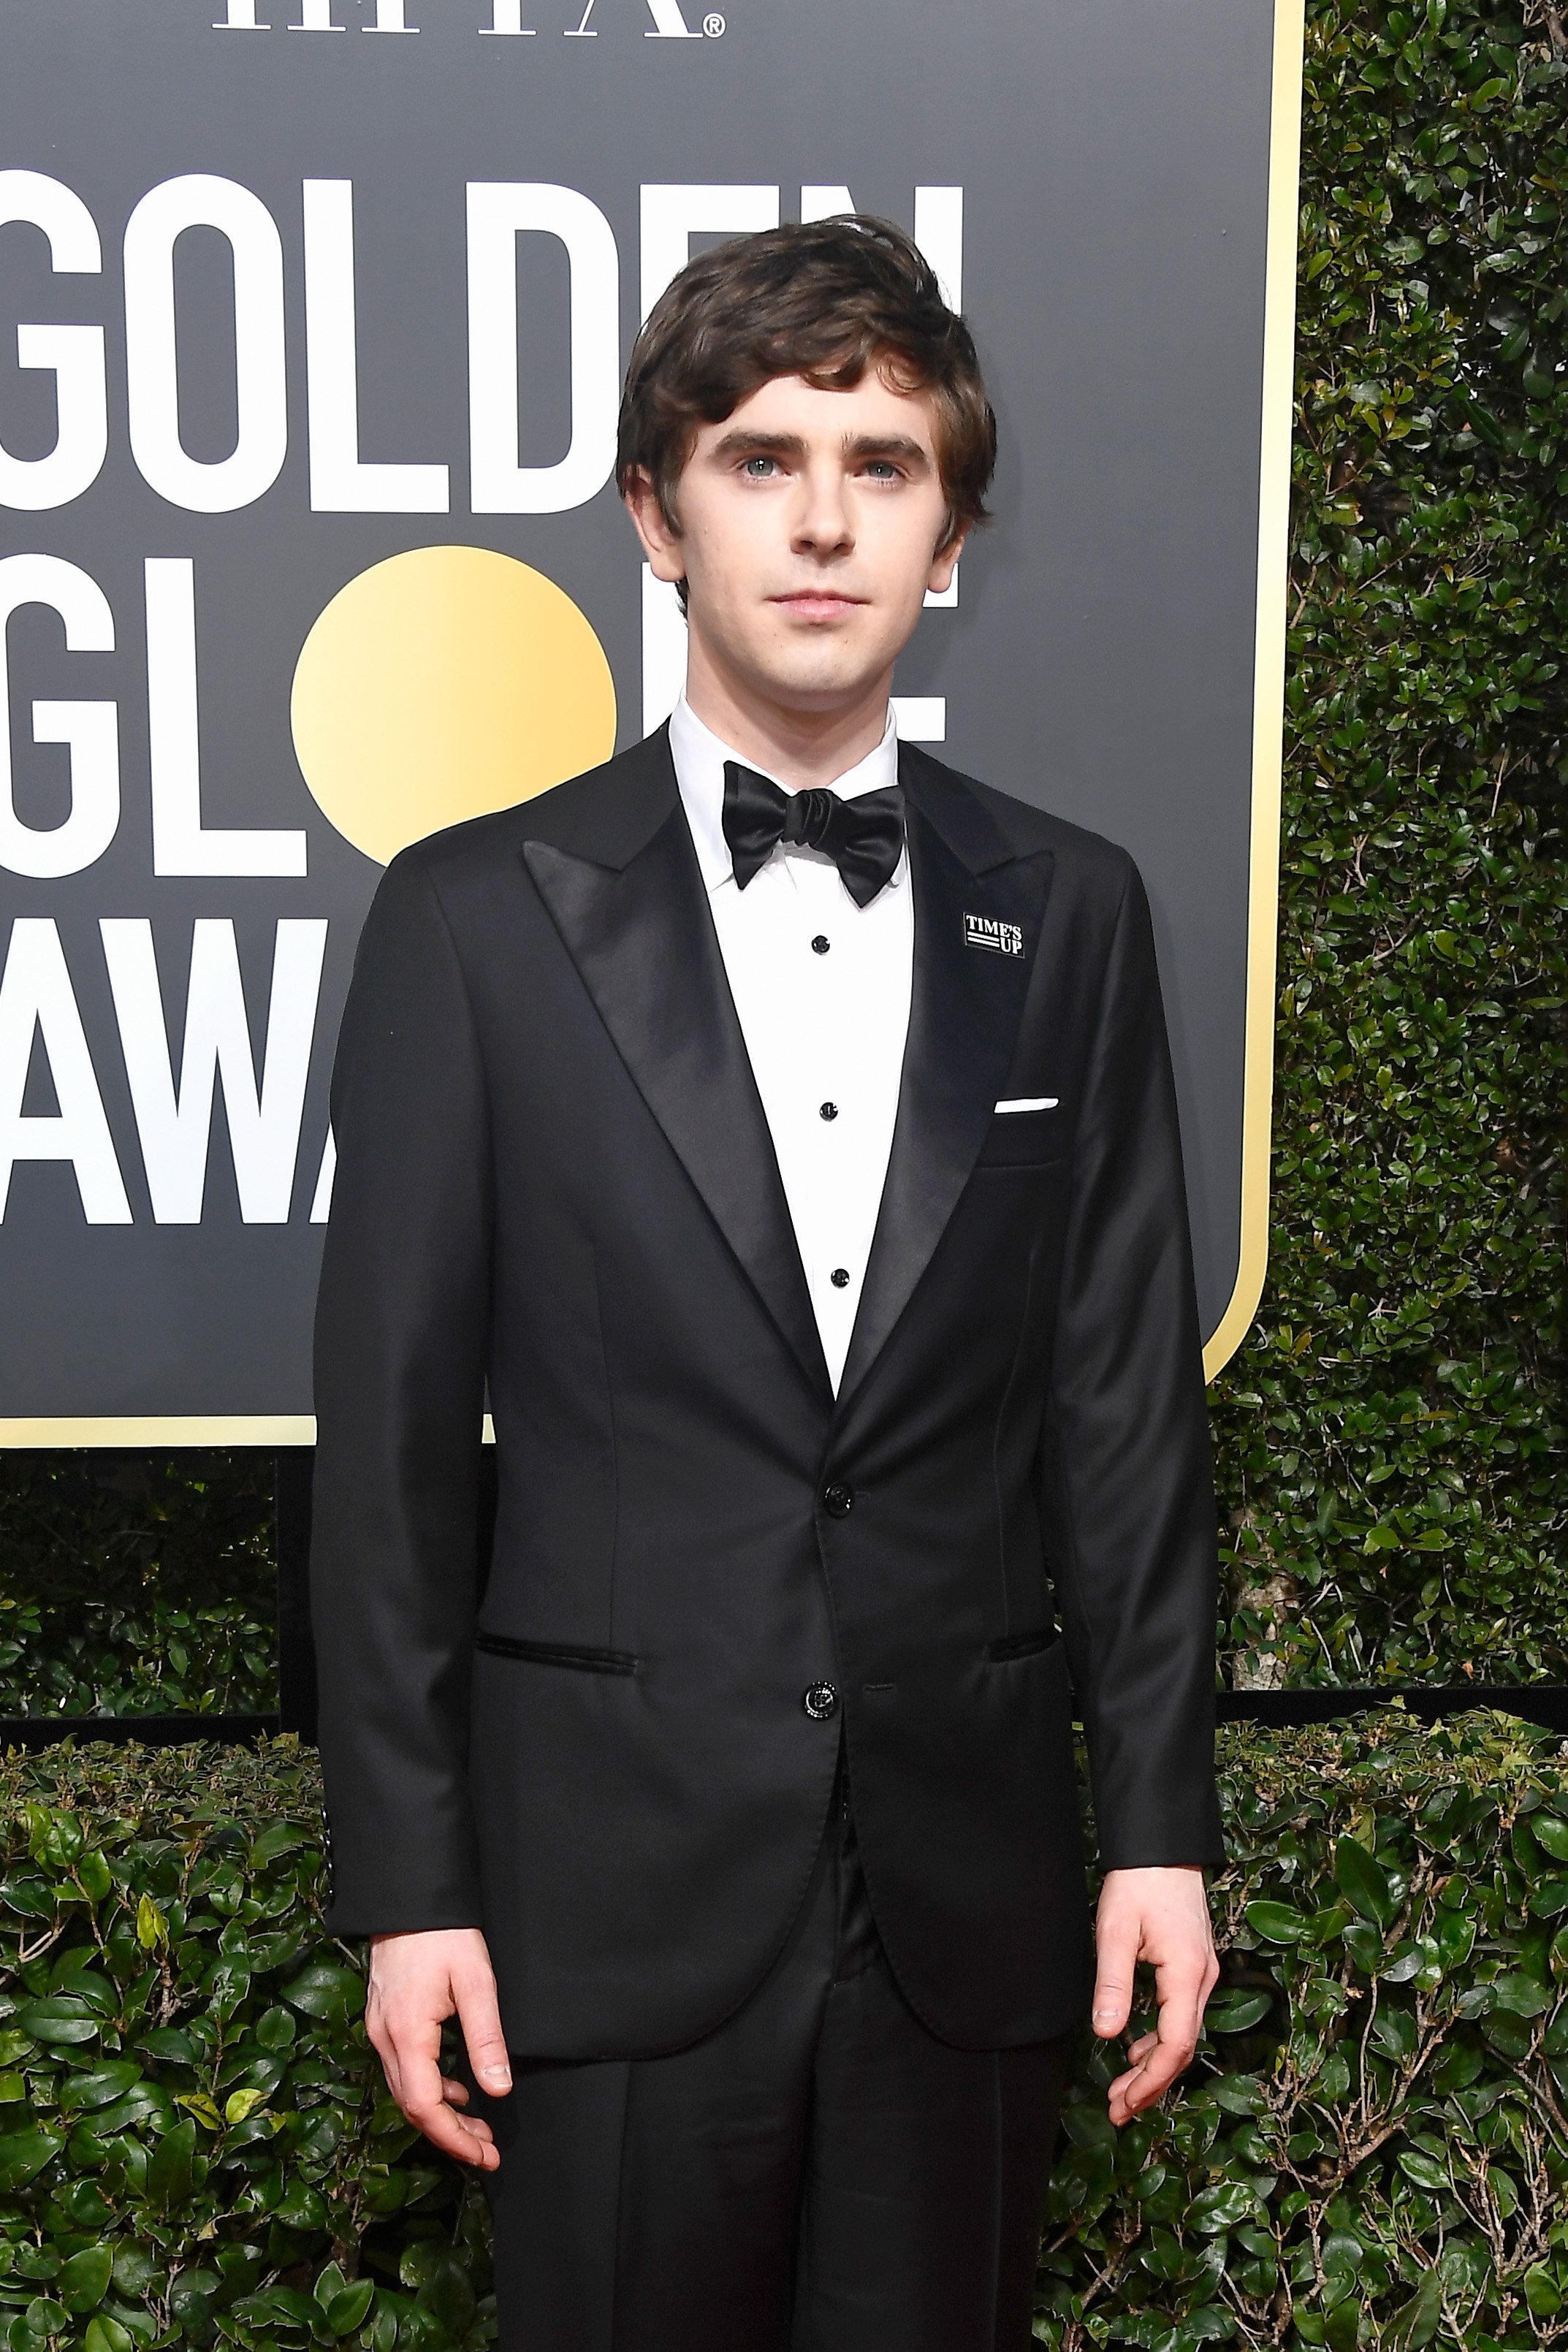 Freddie Highmore attends the 75th Annual Golden Globe Awards in Beverly Hills, California on January 7, 2018 | Photo: Getty Images